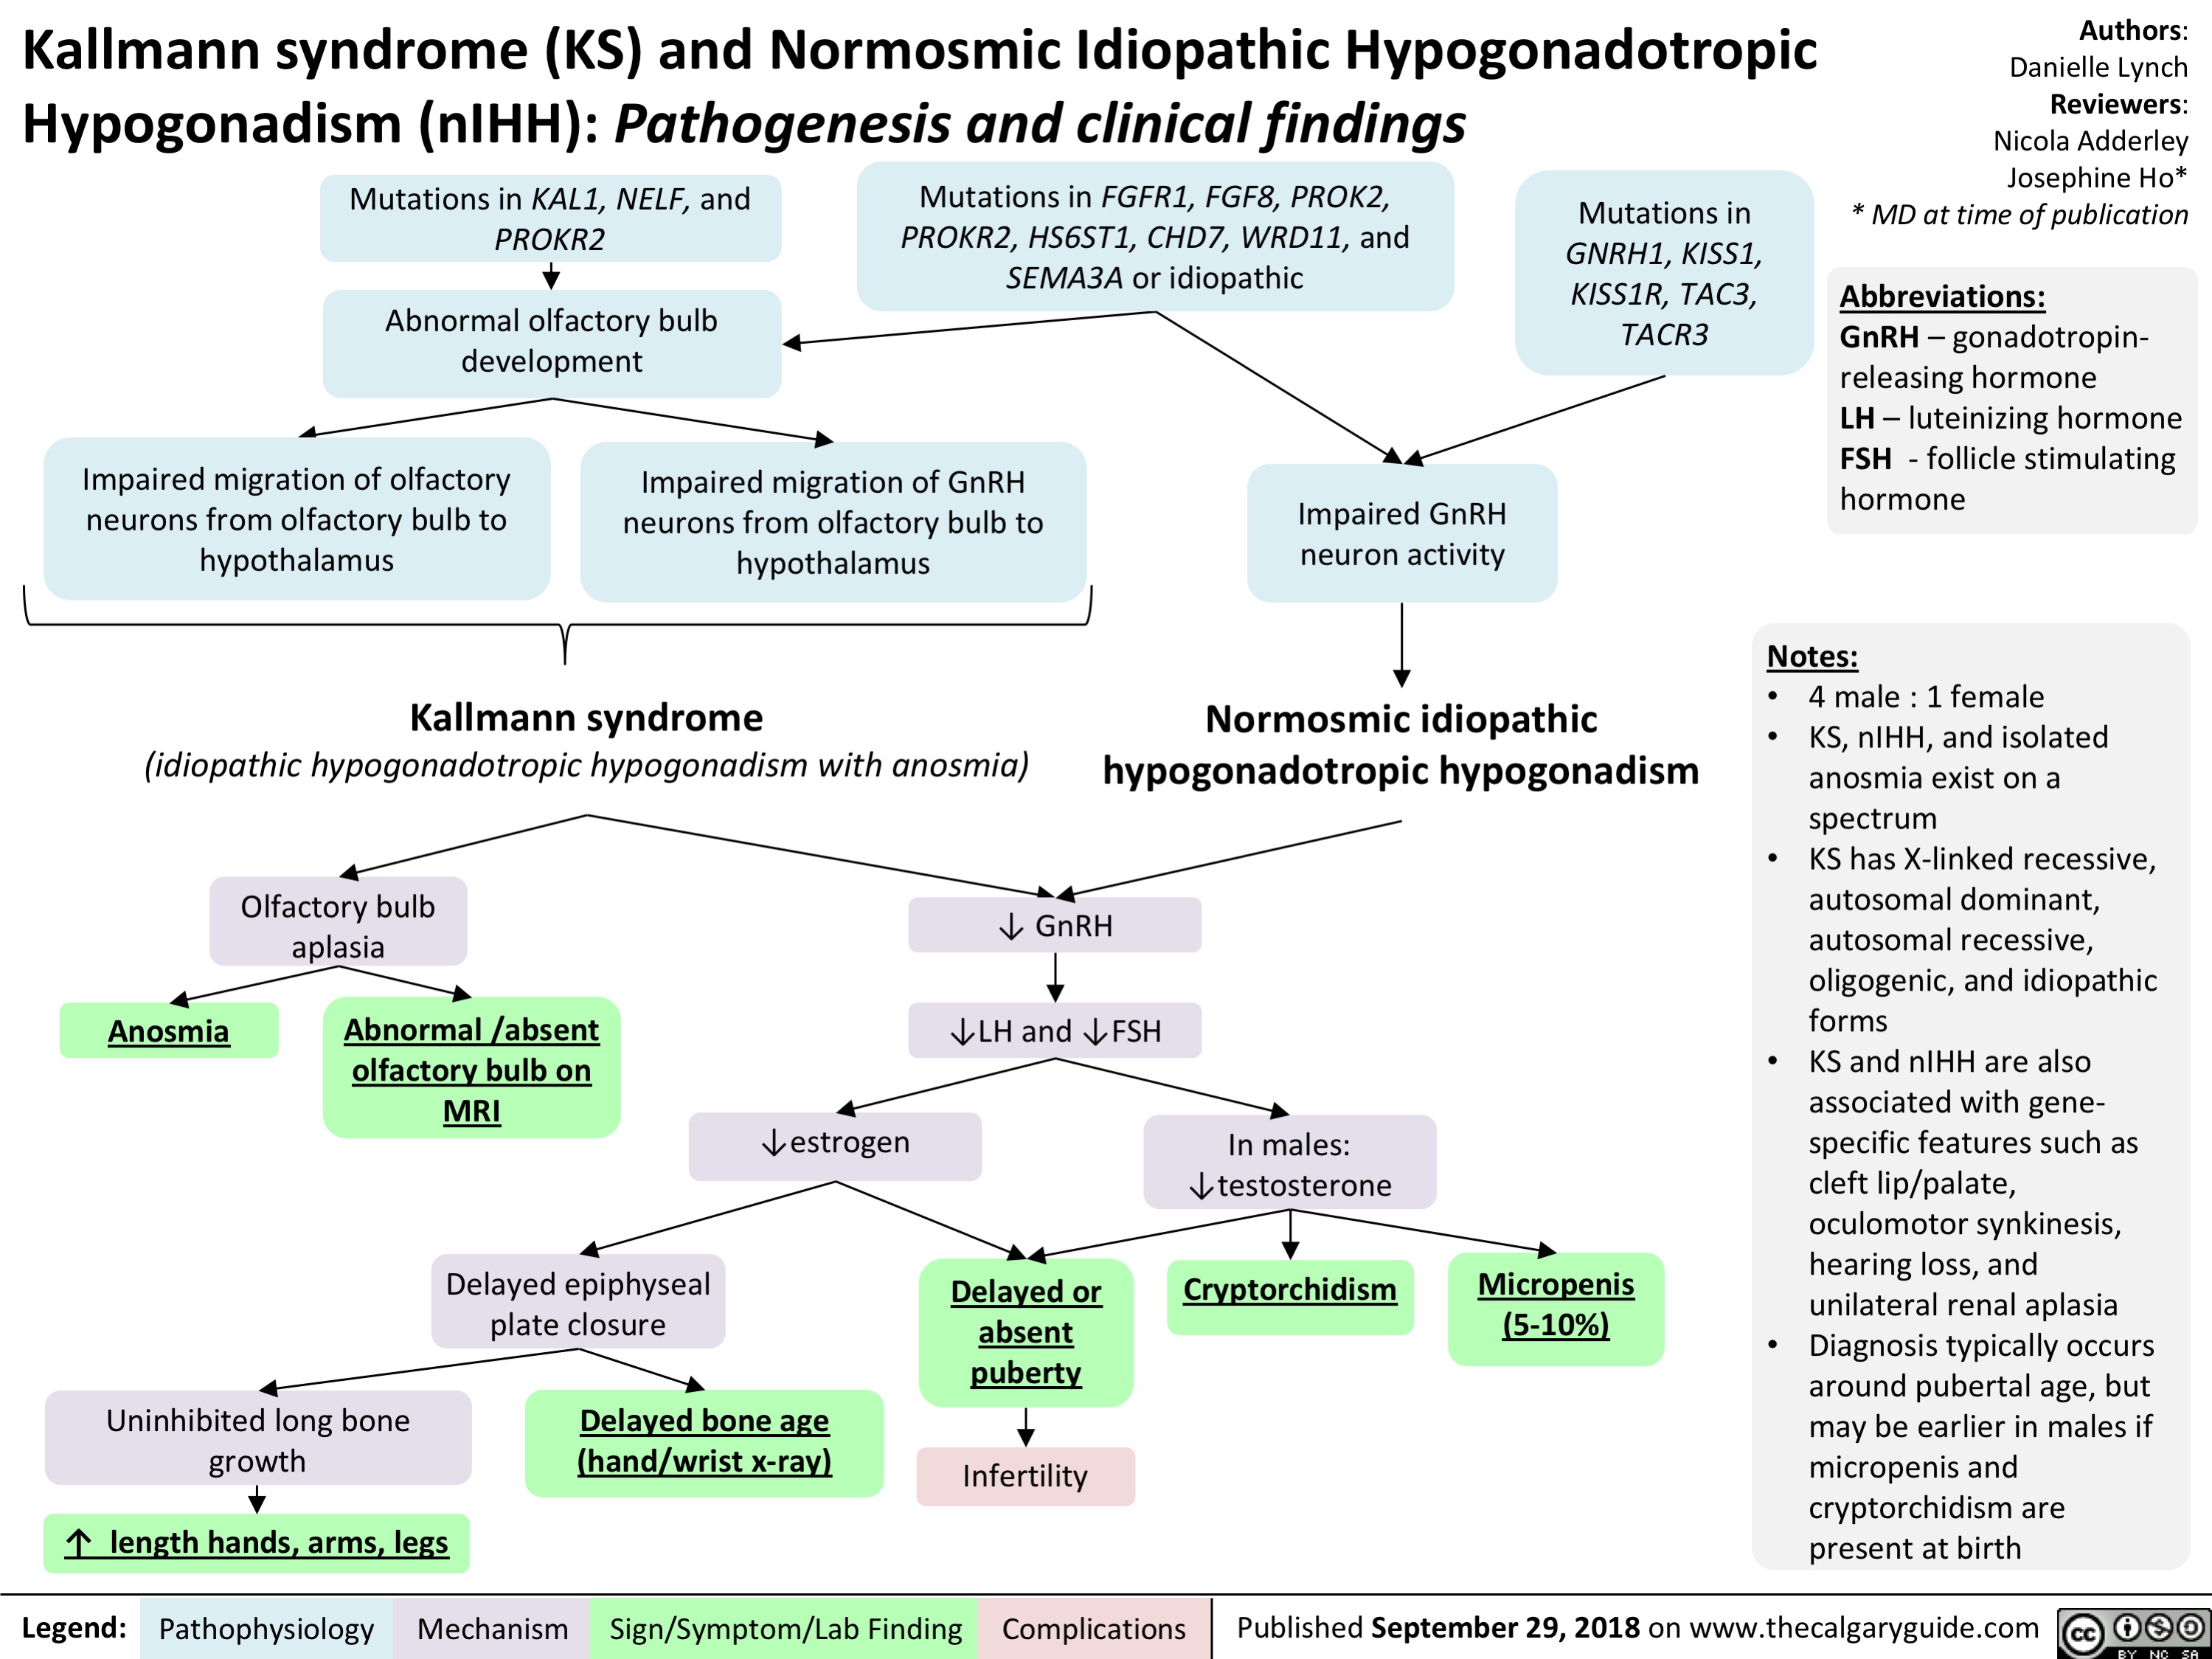 Kallmann syndrome (KS) and Normosmic Idiopathic Hypogonadotropic Hypogonadism (nIHH): Pathogenesis and clinical findings
Authors: Danielle Lynch Reviewers: Nicola Adderley Josephine Ho* * MD at time of publication
Abbreviations:
GnRH – gonadotropin- releasing hormone
LH – luteinizing hormone FSH - follicle stimulating hormone
Notes:
• 4 male : 1 female
• KS, nIHH, and isolated
anosmia exist on a
spectrum
• KS has X-linked recessive,
autosomal dominant, autosomal recessive,
oligogenic, and idiopathic
forms
• KS and nIHH are also
associated with gene- specific features such as
cleft lip/palate, oculomotor synkinesis, hearing loss, and unilateral renal aplasia
• Diagnosis typically occurs around pubertal age, but may be earlier in males if micropenis and cryptorchidism are present at birth
   Mutations in KAL1, NELF, and PROKR2
Abnormal olfactory bulb development
Mutations in FGFR1, FGF8, PROK2, PROKR2, HS6ST1, CHD7, WRD11, and SEMA3A or idiopathic
Mutations in
GNRH1, KISS1, KISS1R, TAC3, TACR3
           Impaired migration of olfactory neurons from olfactory bulb to hypothalamus
Impaired migration of GnRH neurons from olfactory bulb to hypothalamus
Impaired GnRH neuron activity
     Kallmann syndrome
(idiopathic hypogonadotropic hypogonadism with anosmia)
Normosmic idiopathic hypogonadotropic hypogonadism
          Anosmia
Olfactory bulb aplasia
Abnormal /absent olfactory bulb on MRI
↓ GnRH ↓LH and ↓FSH
Delayed or absent puberty
Infertility
     ↓estrogen
In males: ↓testosterone
Cryptorchidism
          Delayed epiphyseal plate closure
Micropenis (5-10%)
        Uninhibited long bone growth
↑ length hands, arms, legs
Delayed bone age (hand/wrist x-ray)
      Legend:
 Pathophysiology
 Mechanism
Sign/Symptom/Lab Finding
  Complications
Published September 29, 2018 on www.thecalgaryguide.com
   